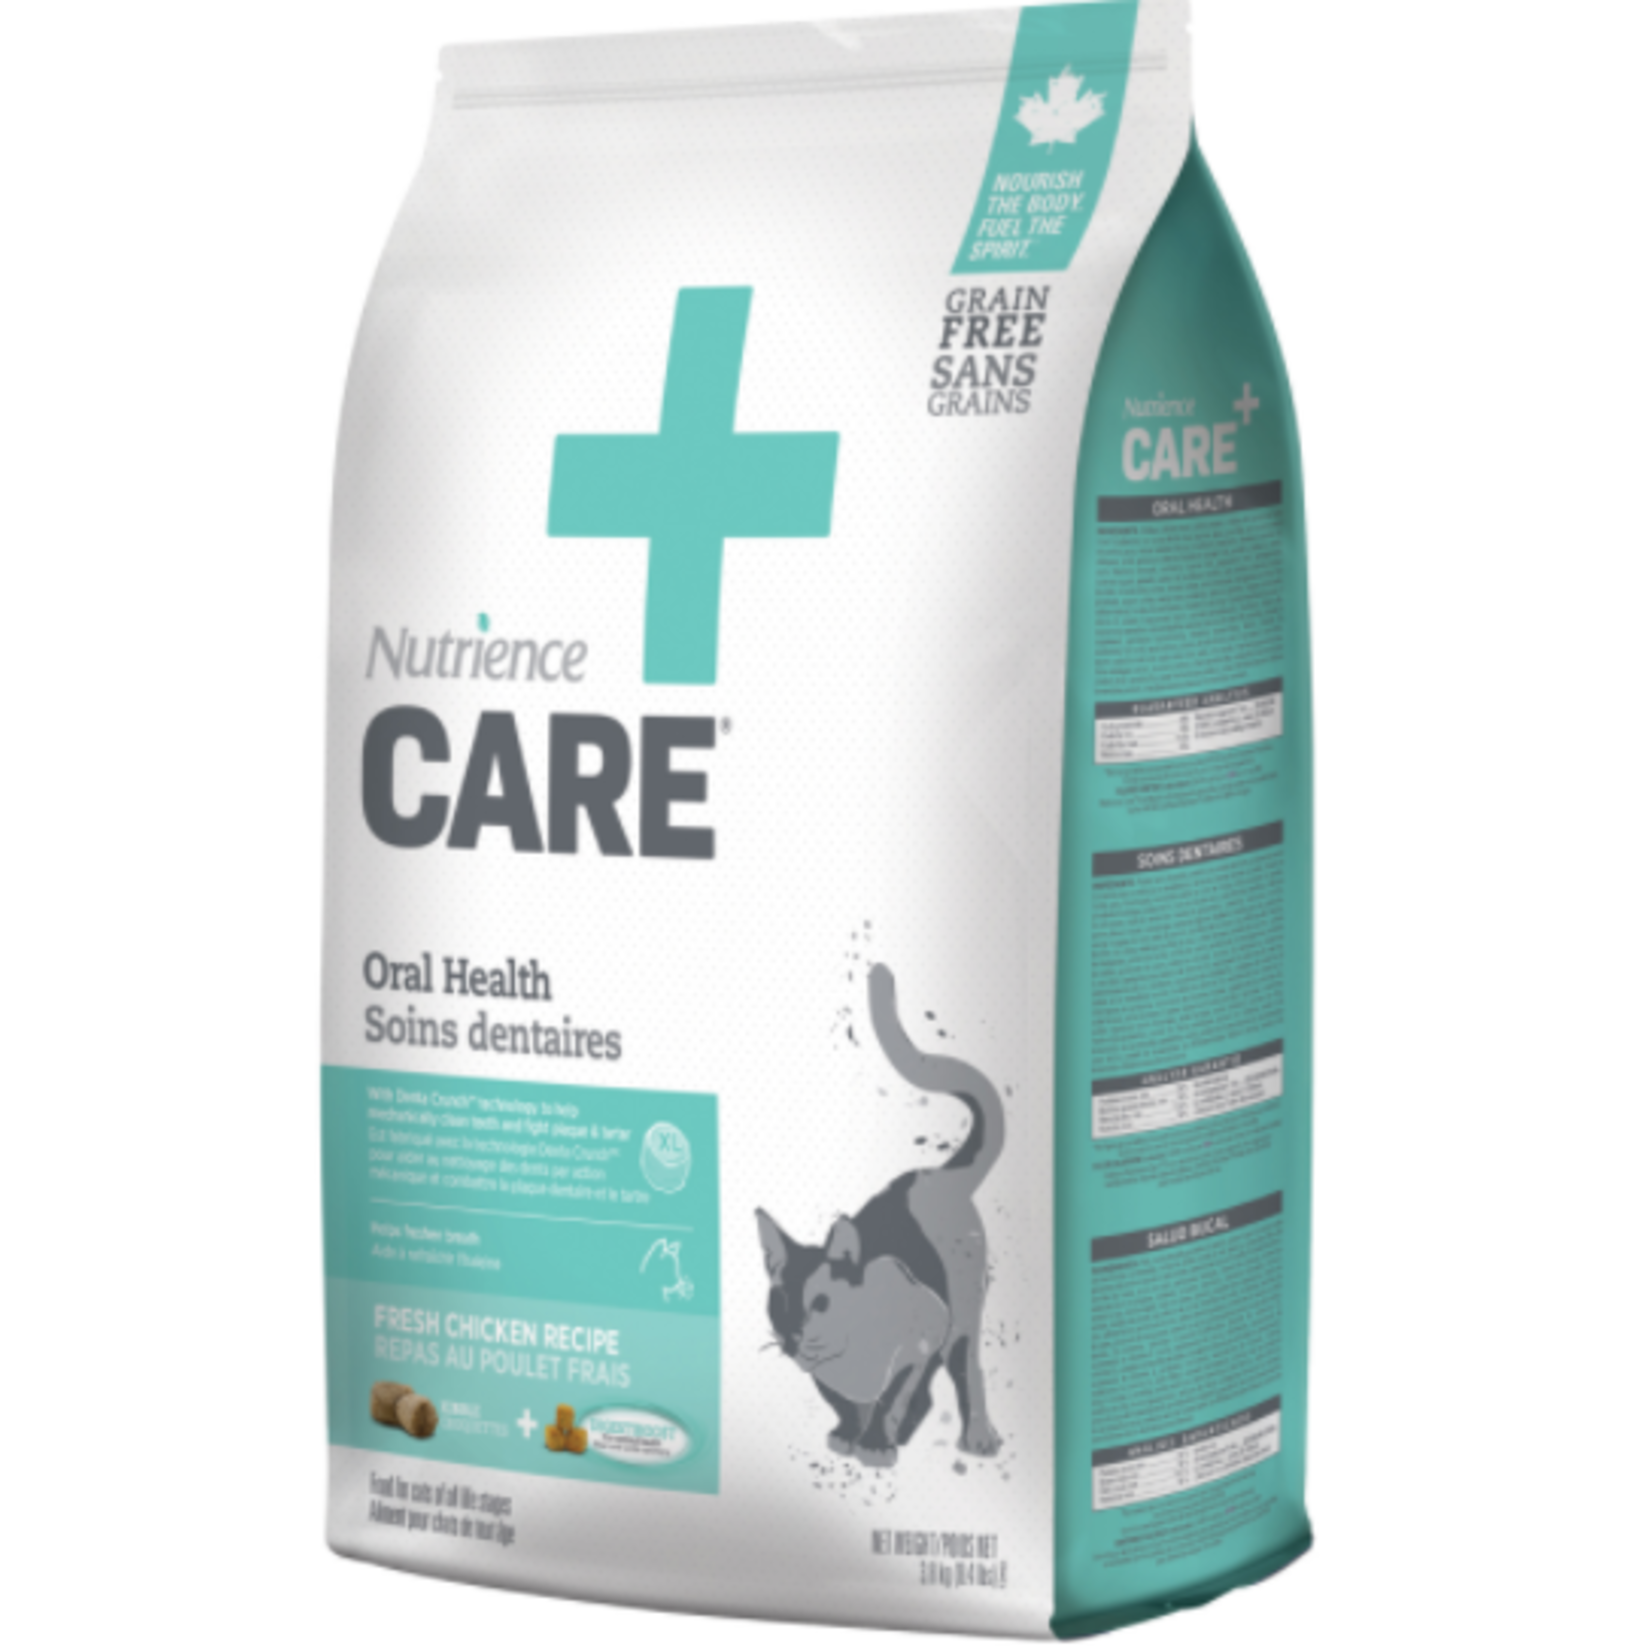 Nutrience Care Oral Health for Cats - 8.4 lbs